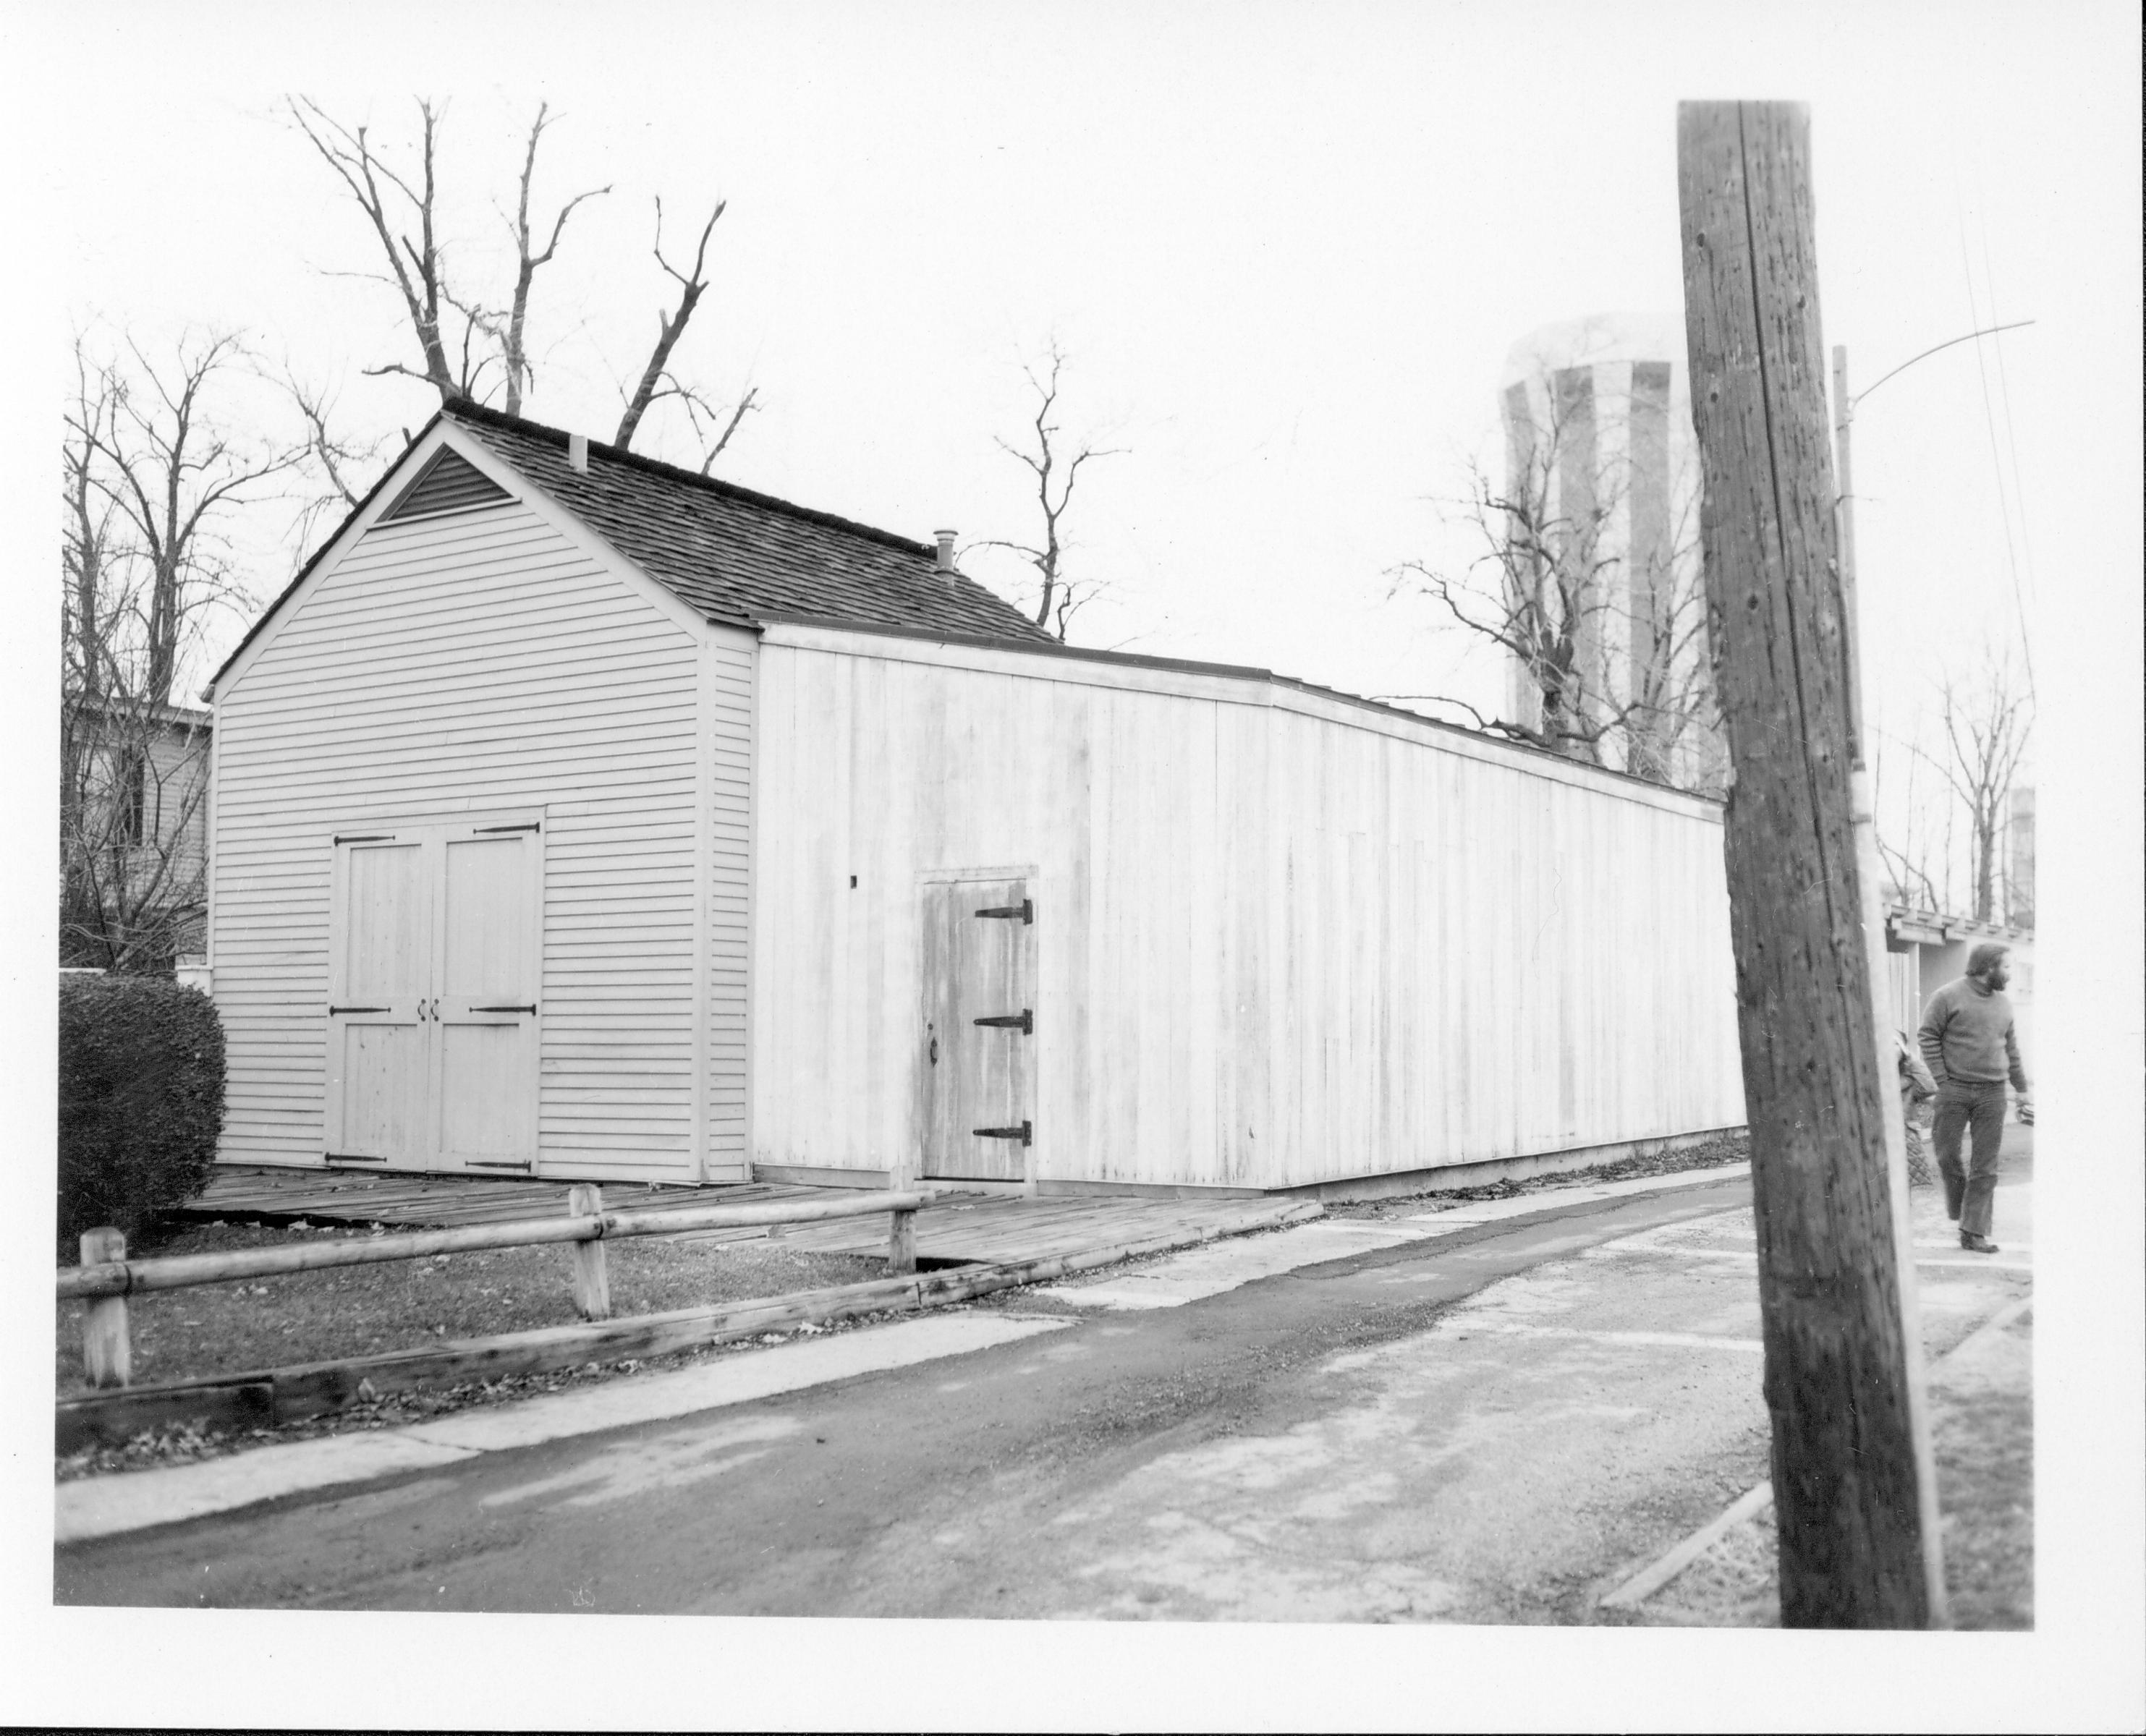 Lincoln Home carriage house and woodshed, with the Lincoln Home in the background. Photographer facing north west.